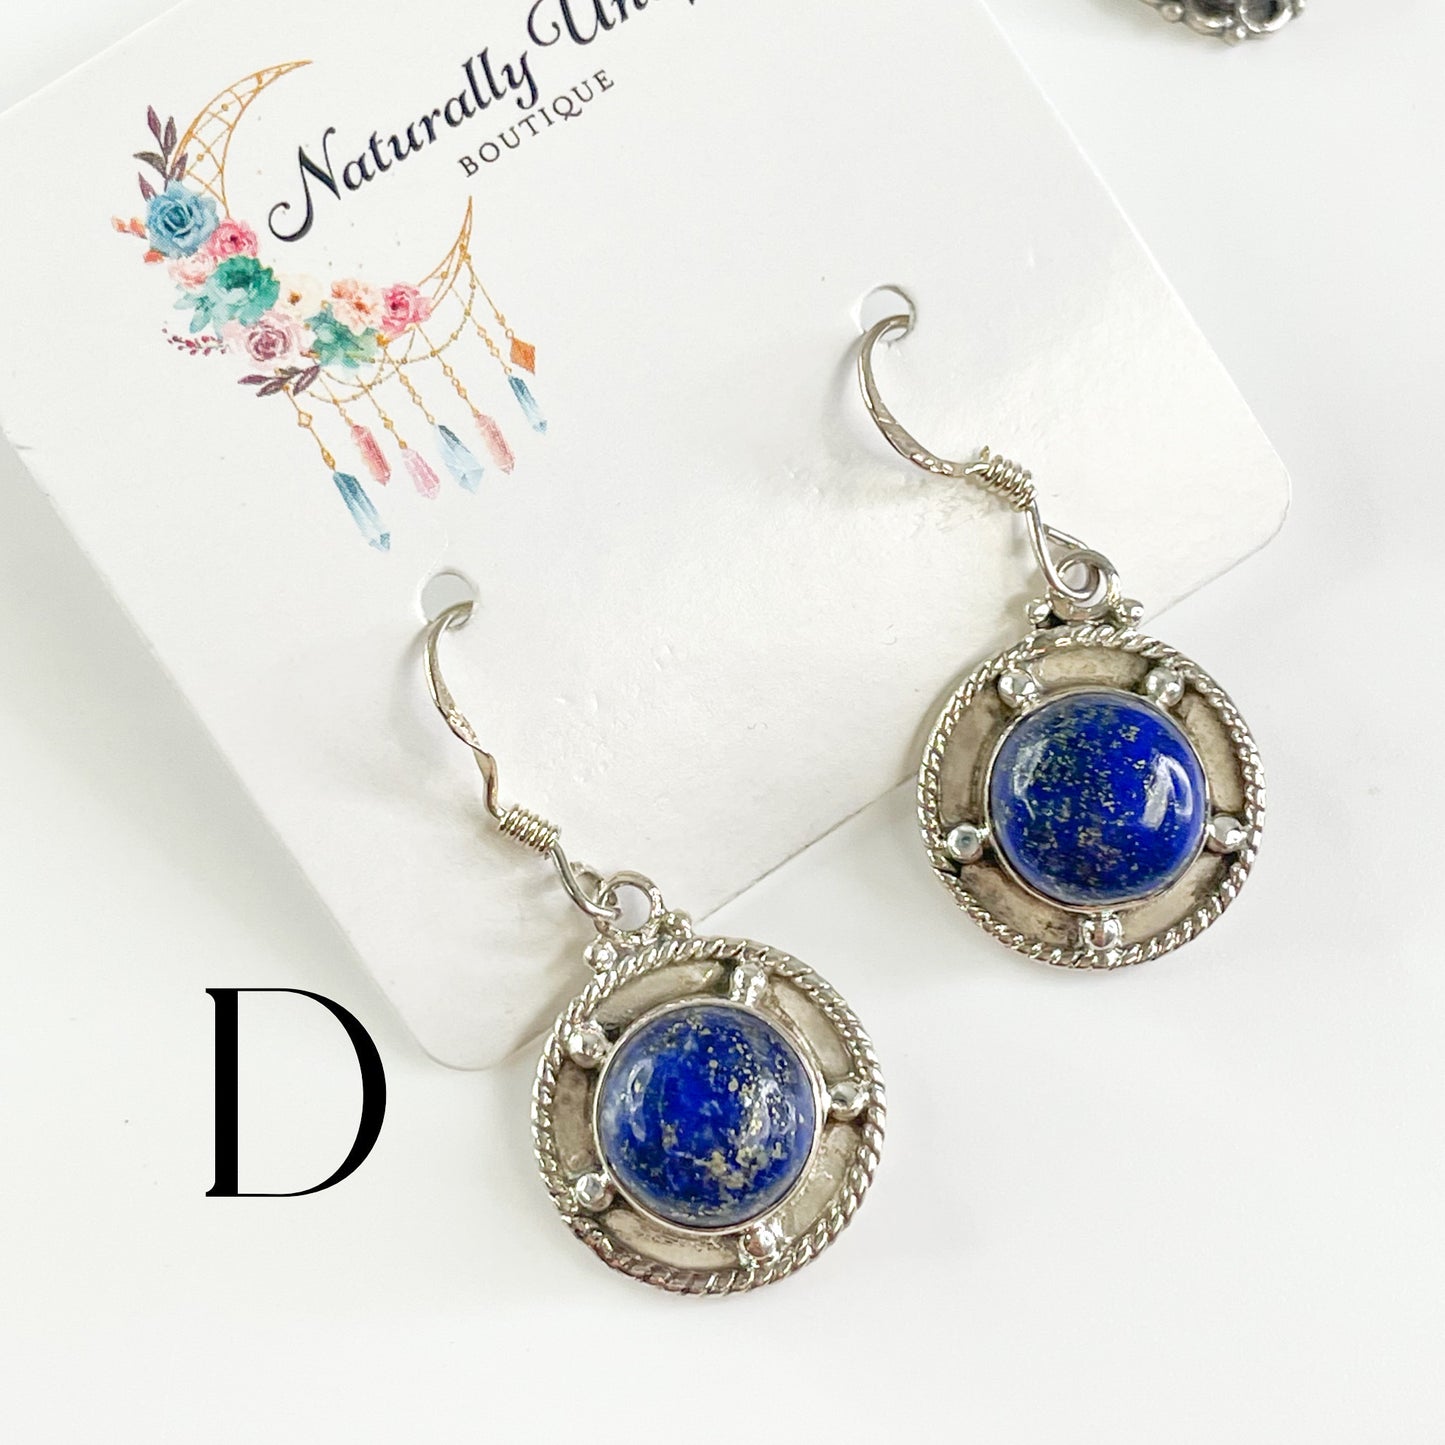 Lapis Lazuli Earring - Solid Sterling Silver